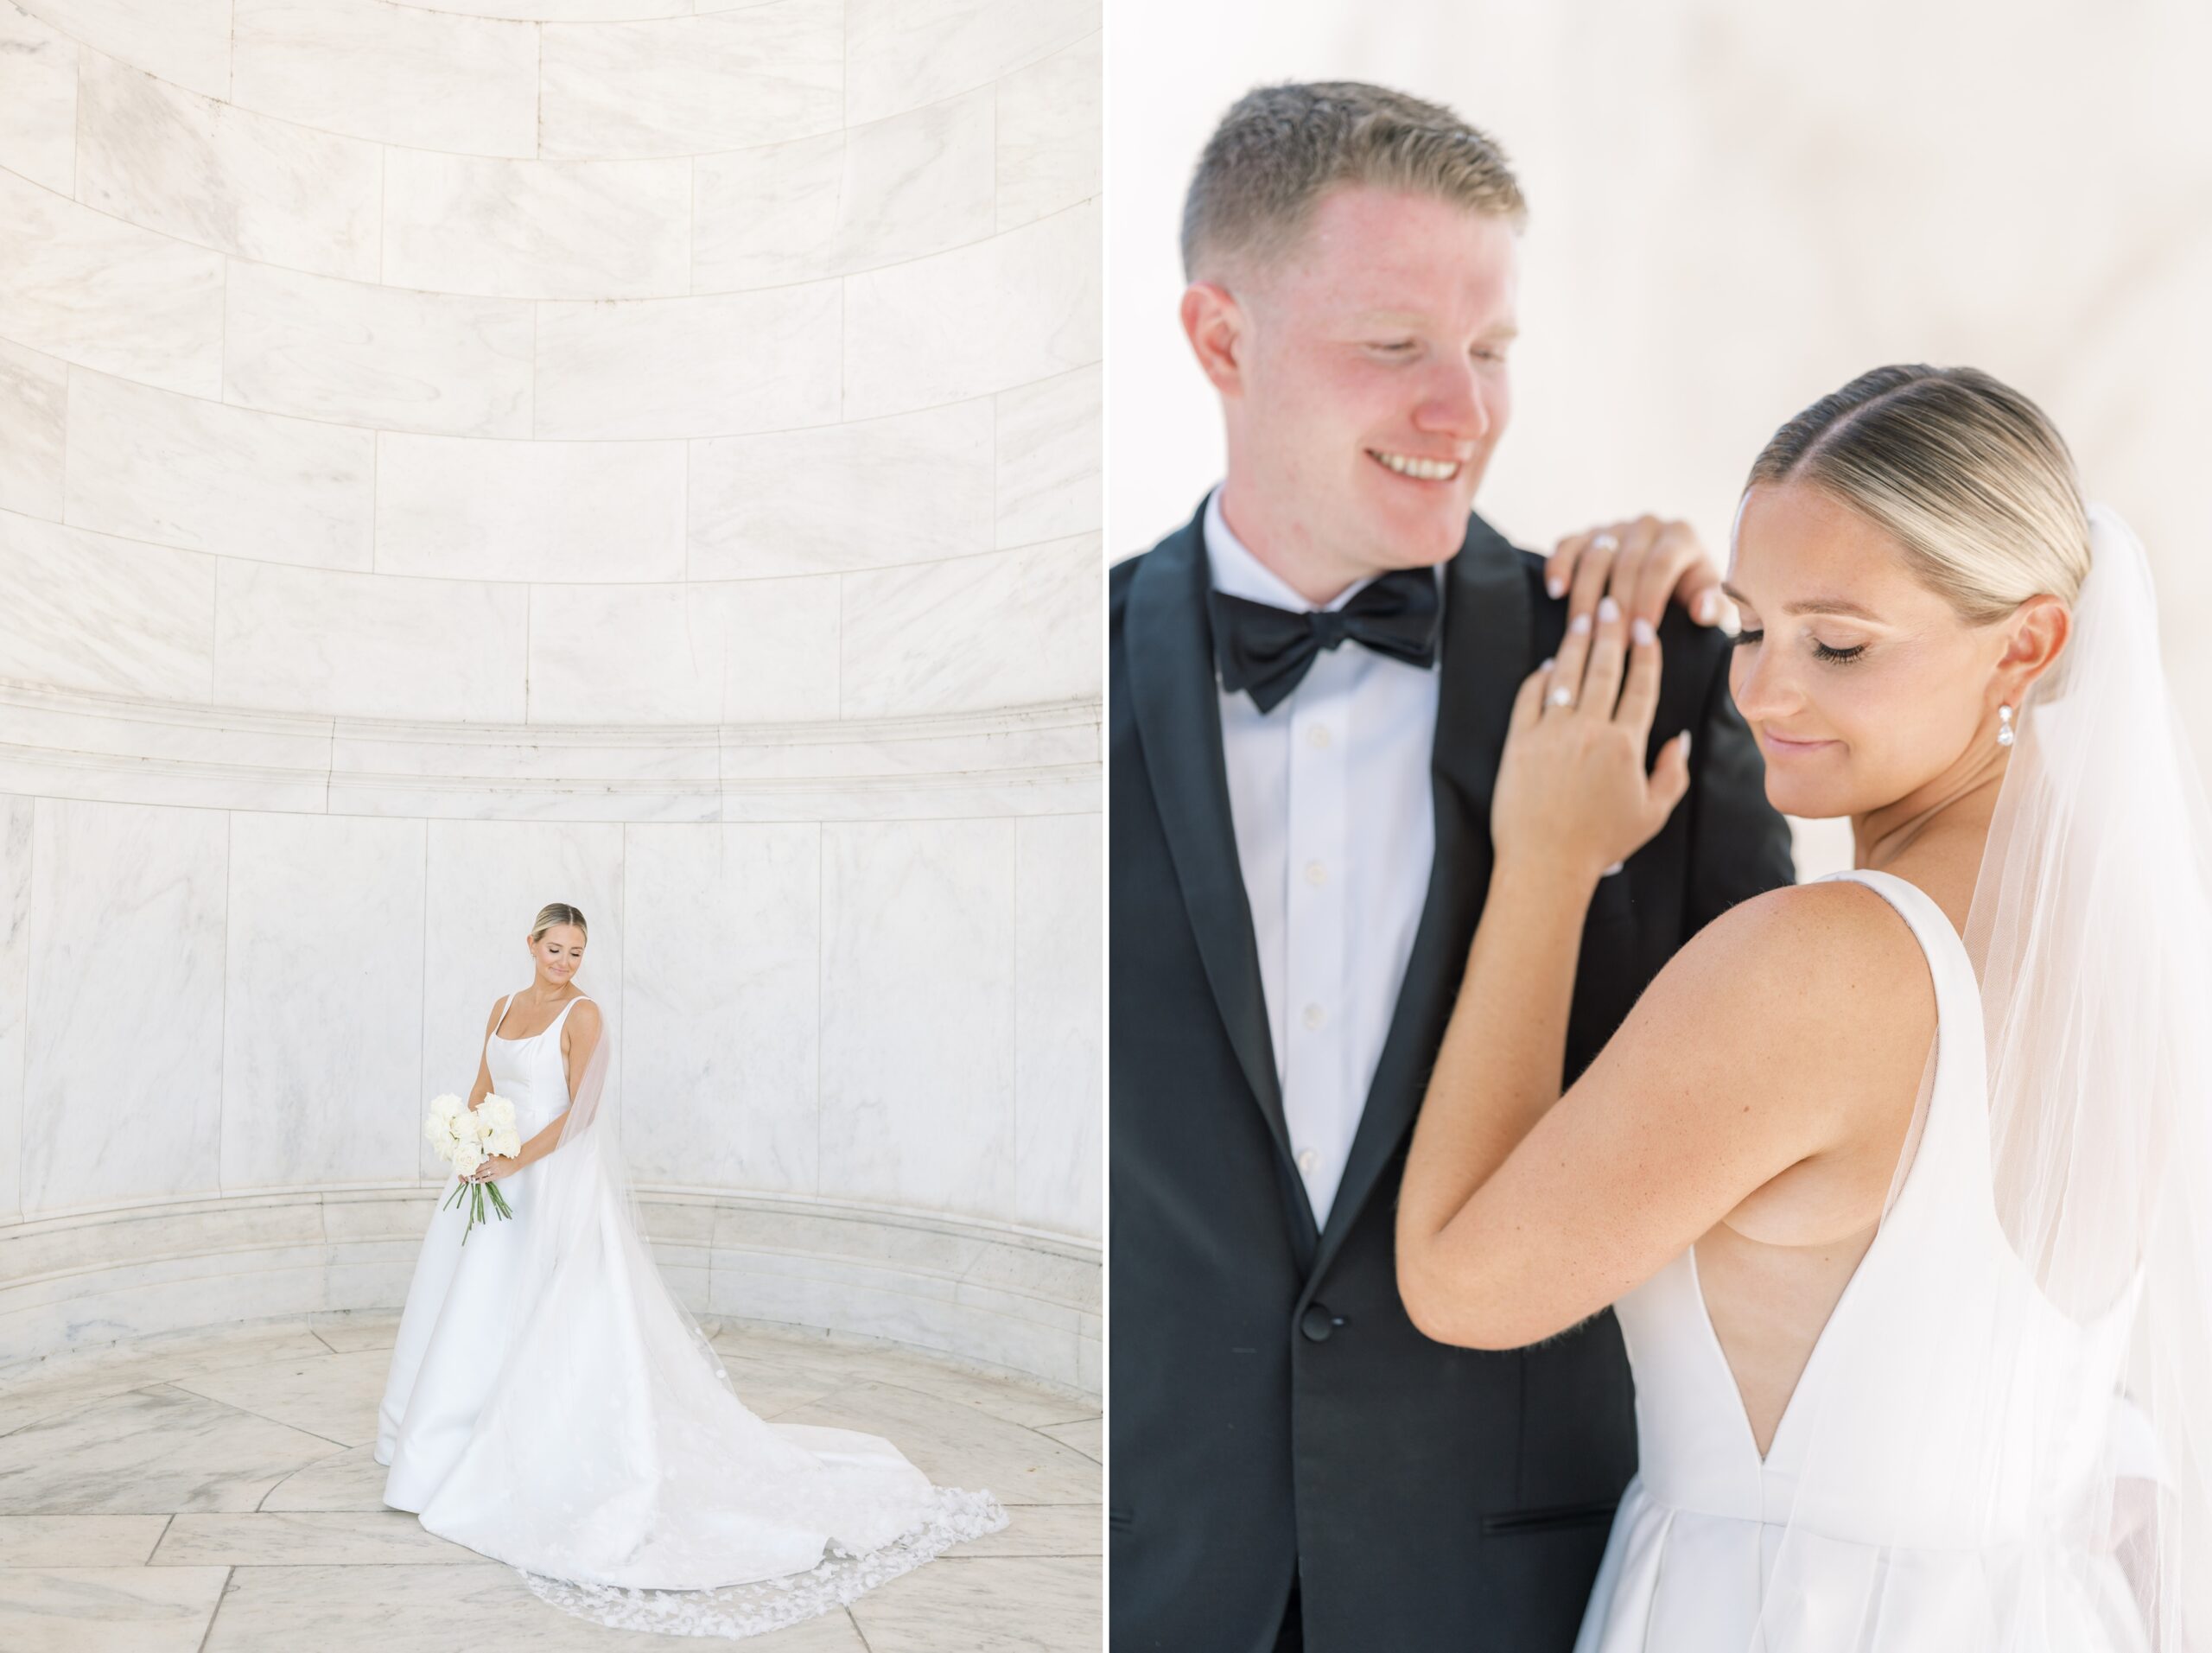 A chic black tie wedding at the downtown Conrad Hotel in Washington, DC. Portraits were captured at the iconic Jefferson Memorial.